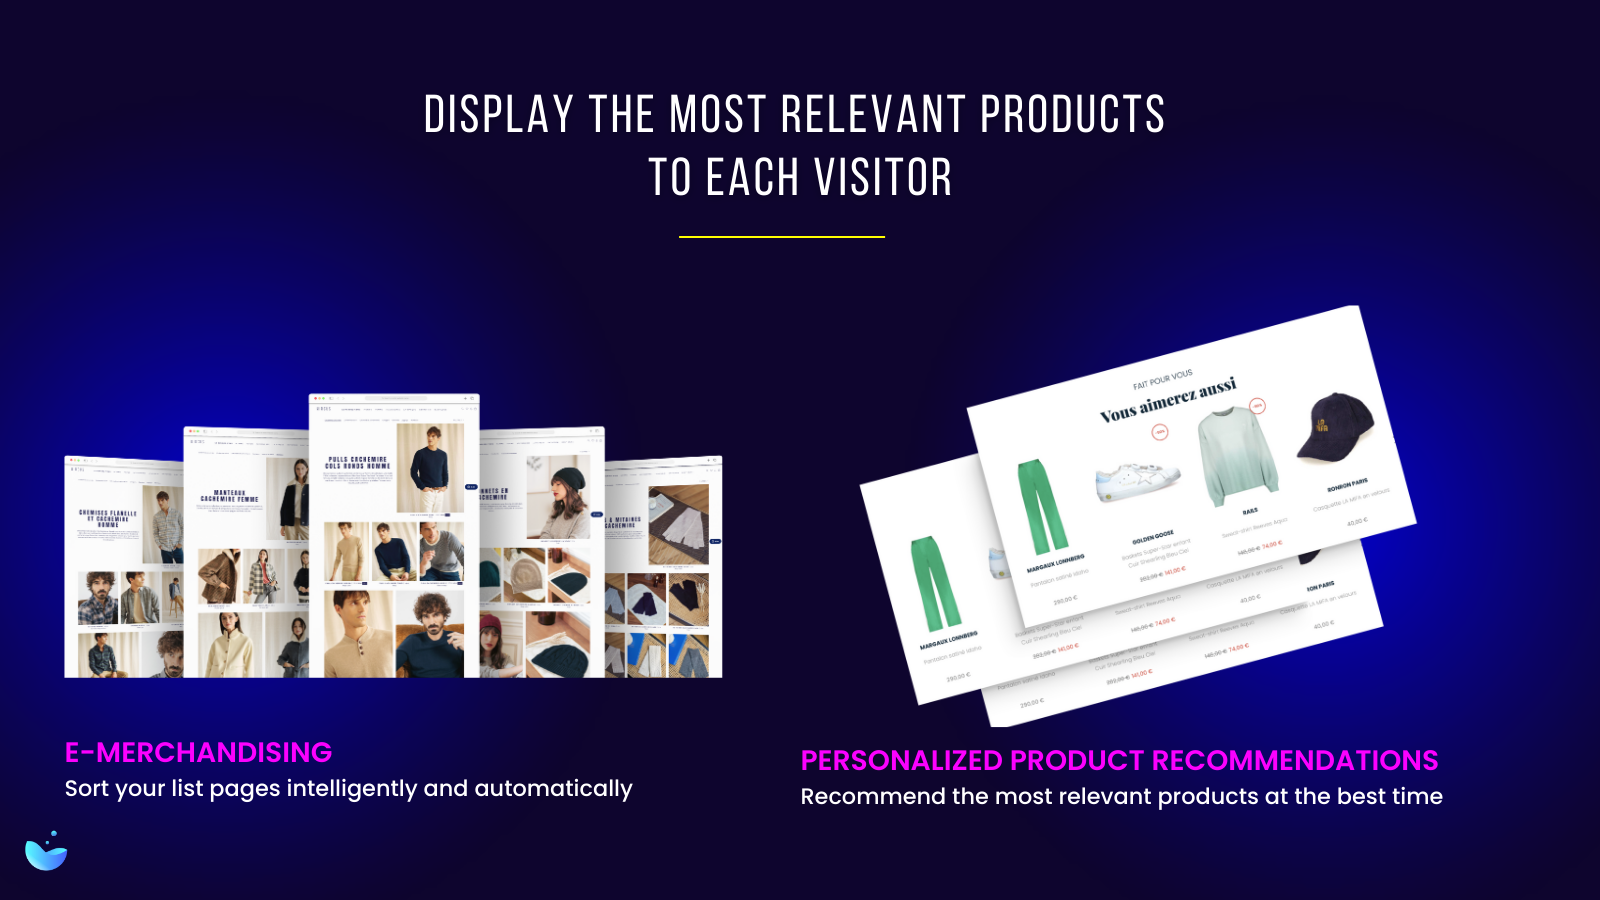 Display the most relevant products